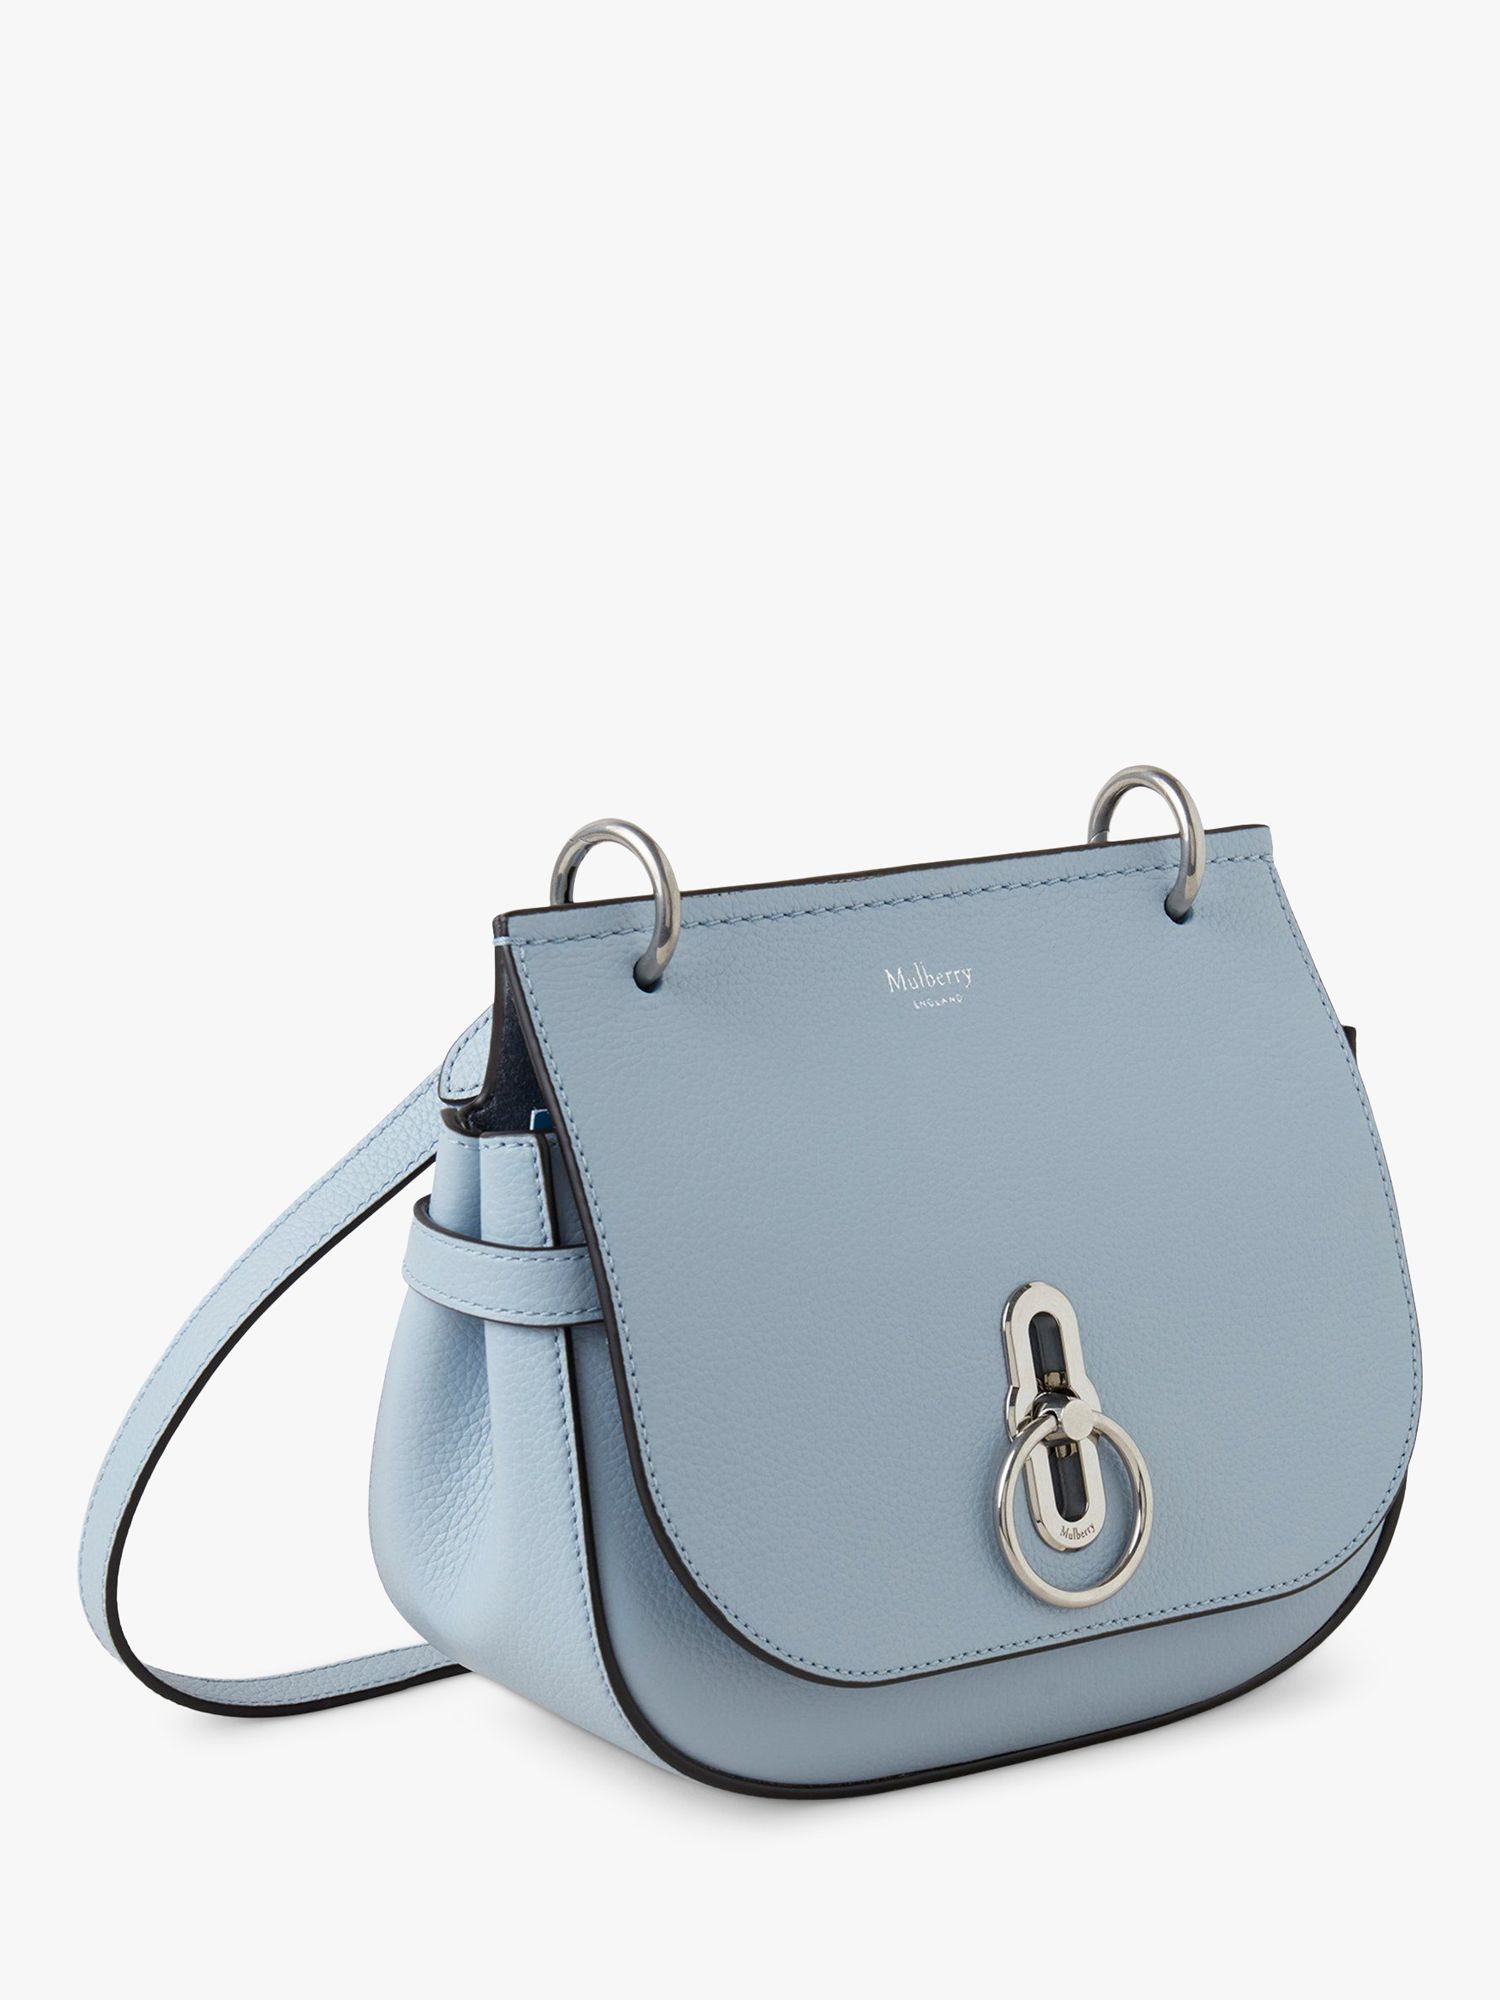 Mulberry Small Amberley Small Classic Grain Leather Satchel, Poplin Blue